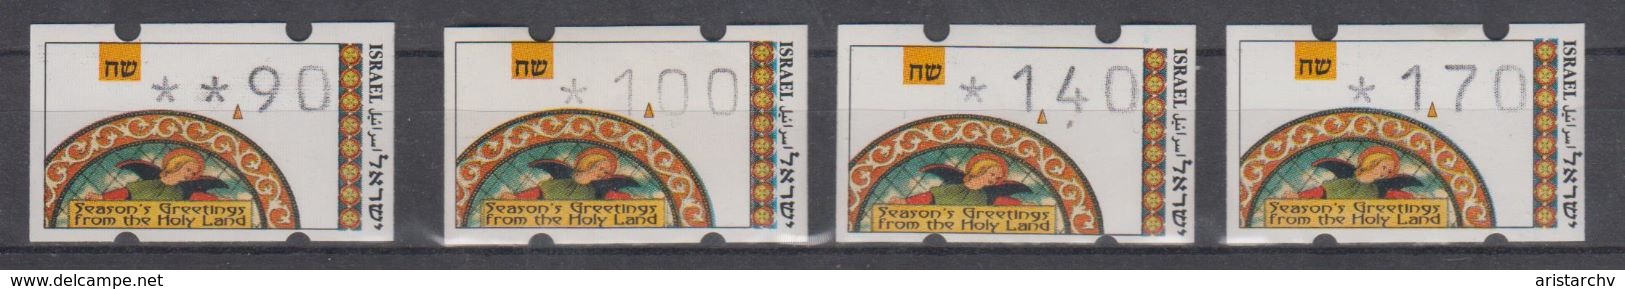 ISRAEL 1994 SIMA ATM CHRISTMAS SEASON'S GREETINGS FROM THE HOLY LAND 0.90 1 1.40 1.70 SHEKELS - Vignettes D'affranchissement (Frama)